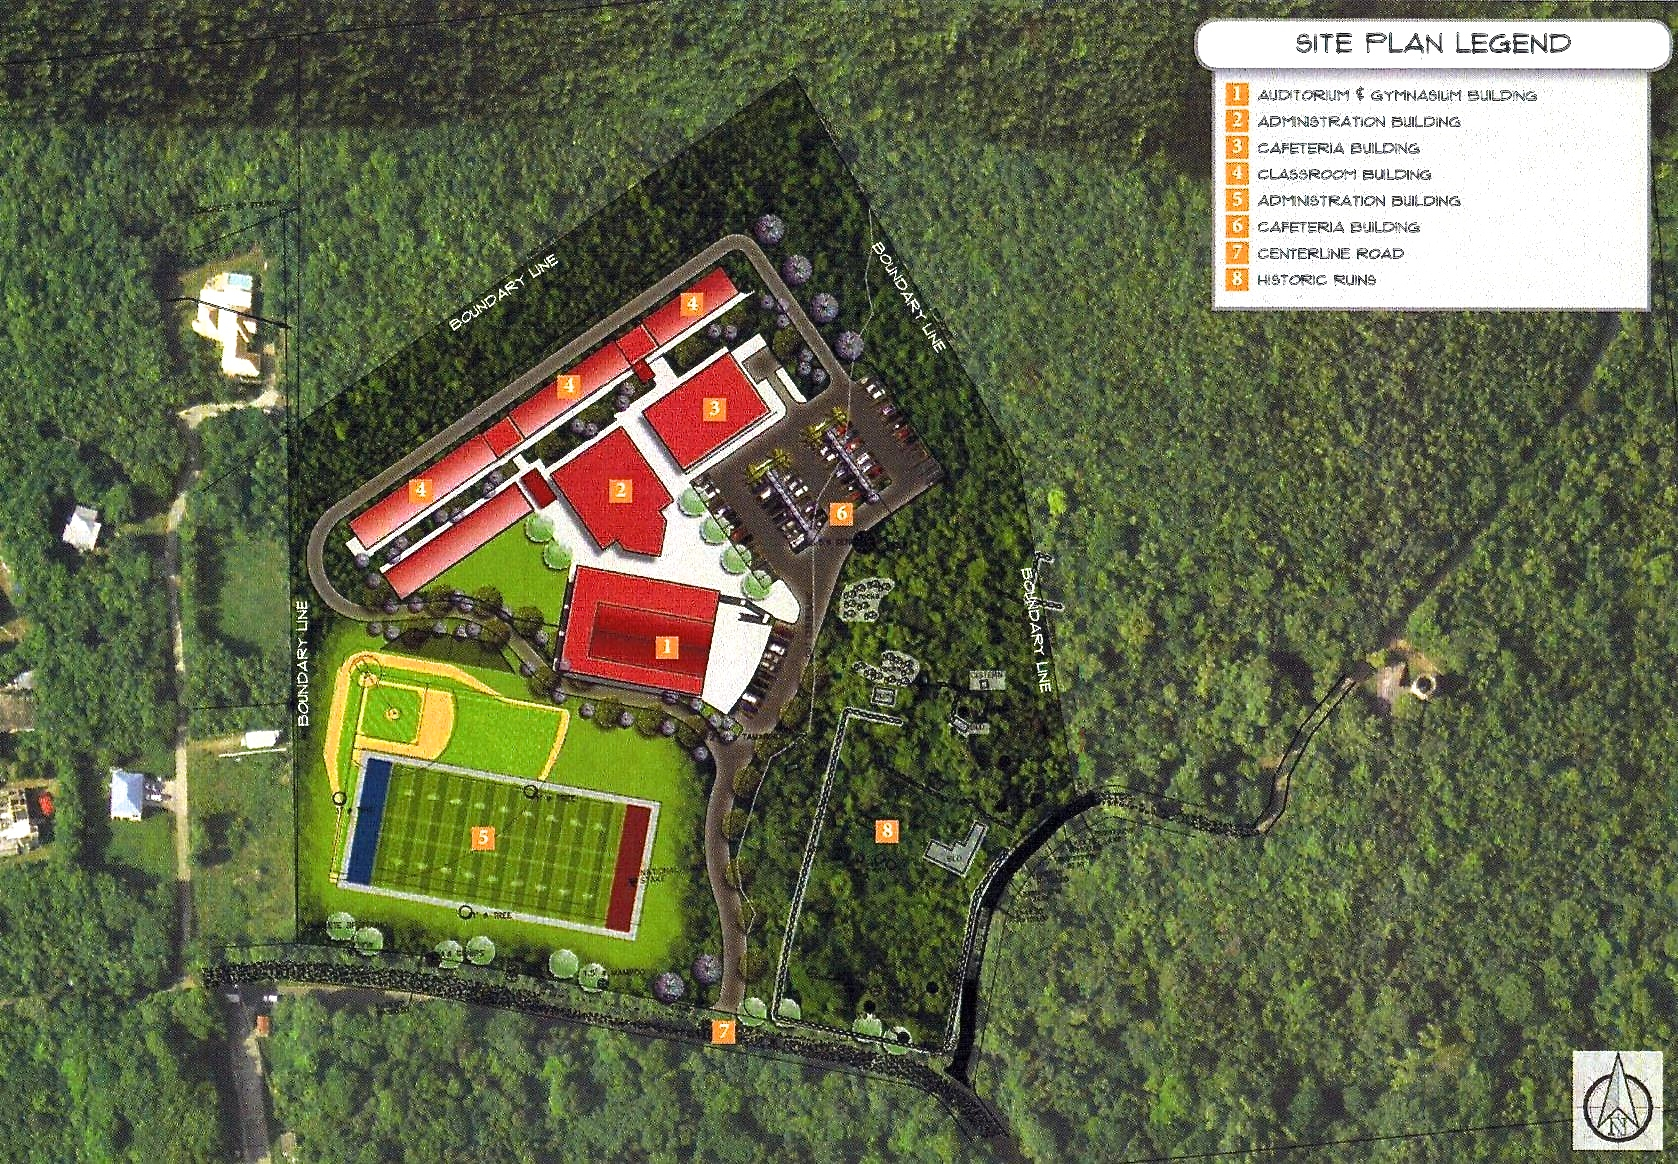 The site plan of the proposed St. John school in Catherineberg.